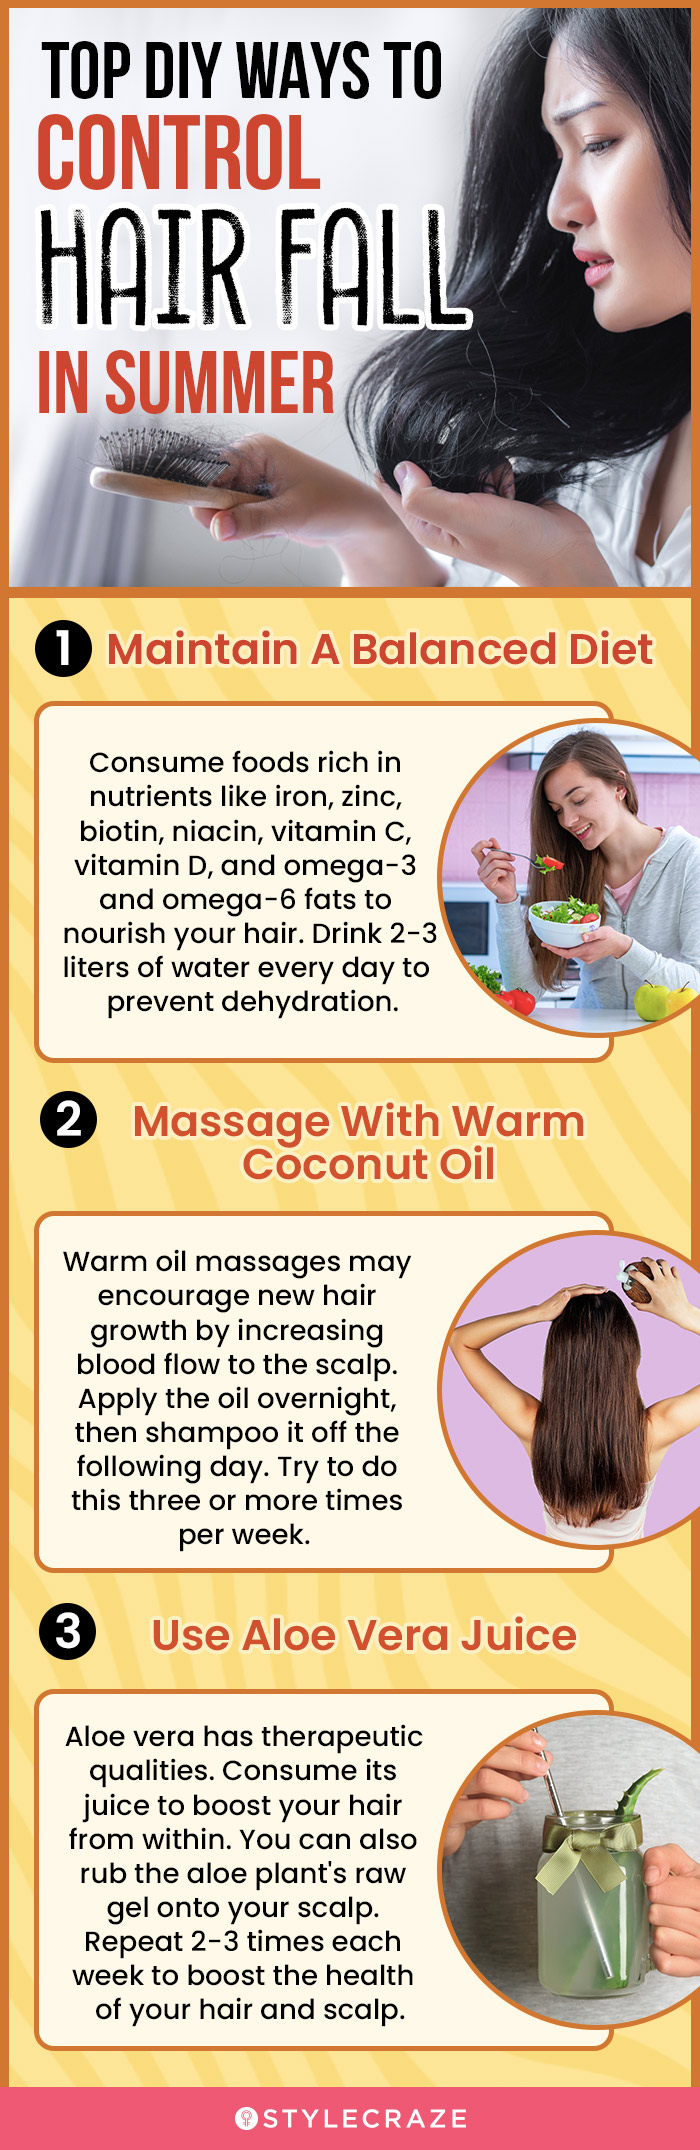 top diy ways to control hair fall in summer (infographic)